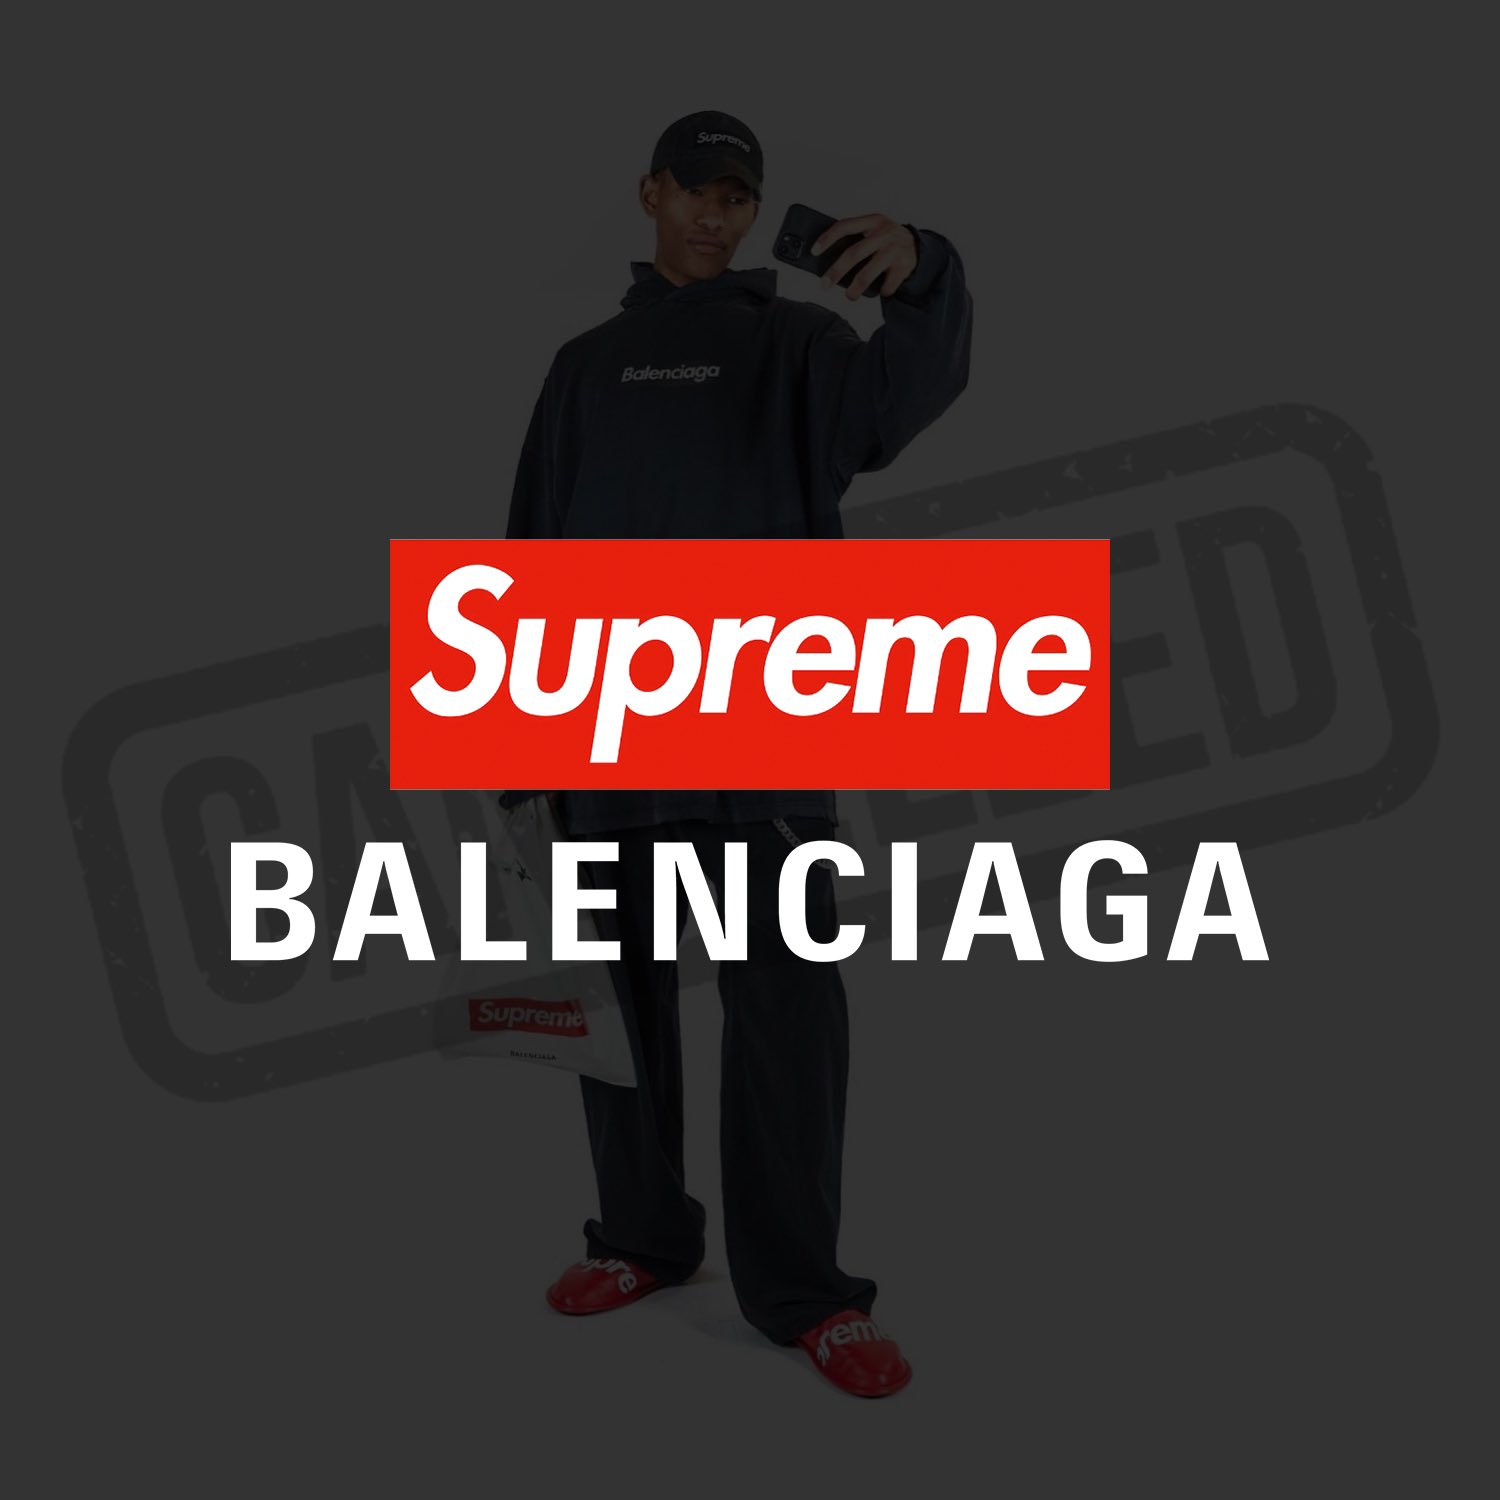 A Balenciaga x Supreme Collaboration Might Be in the Works